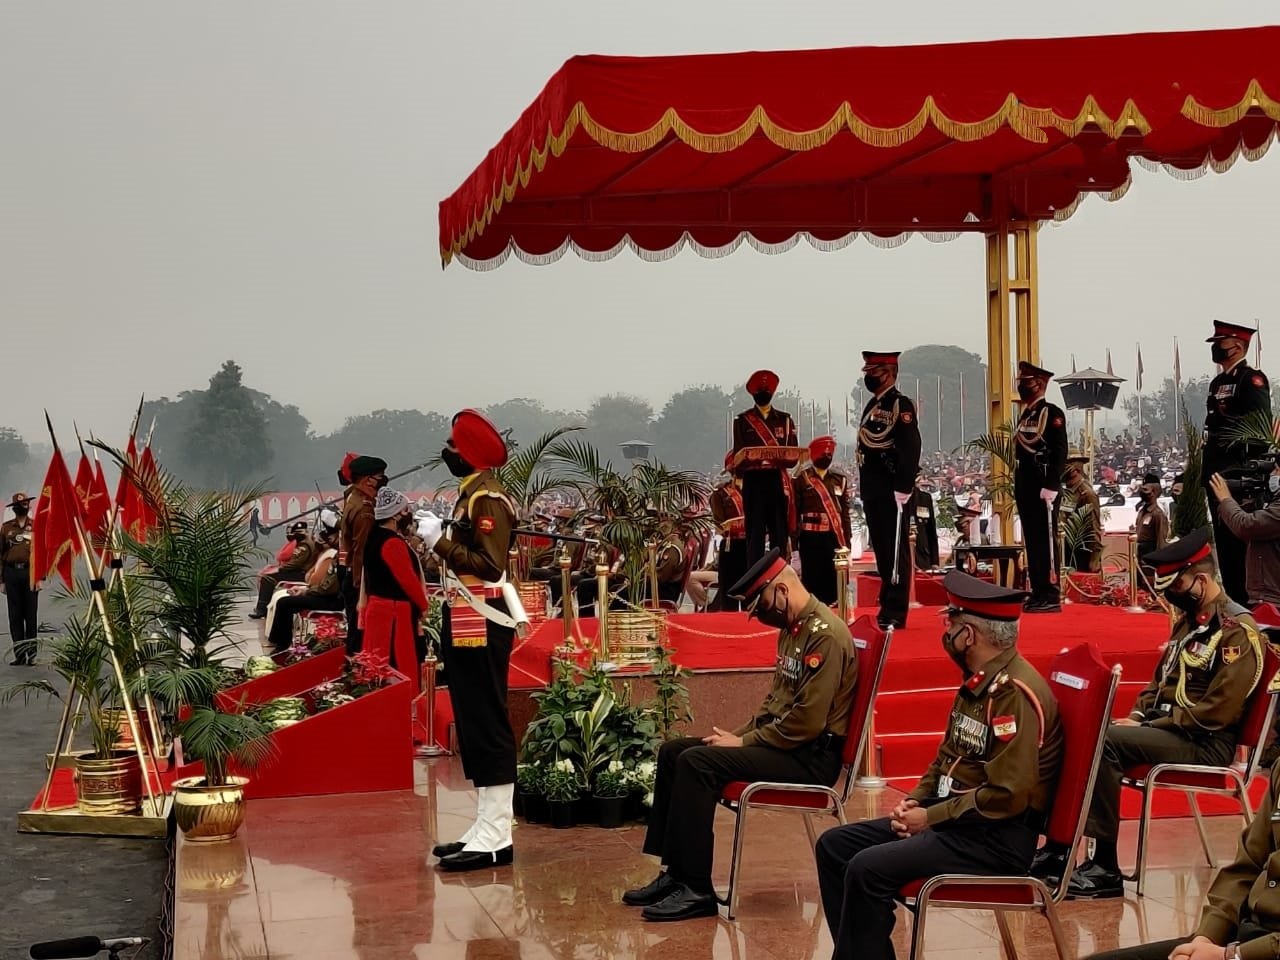 Troops parade at the Kariappa Parade Ground in Delhi on the occasion of Army Day on January 15.